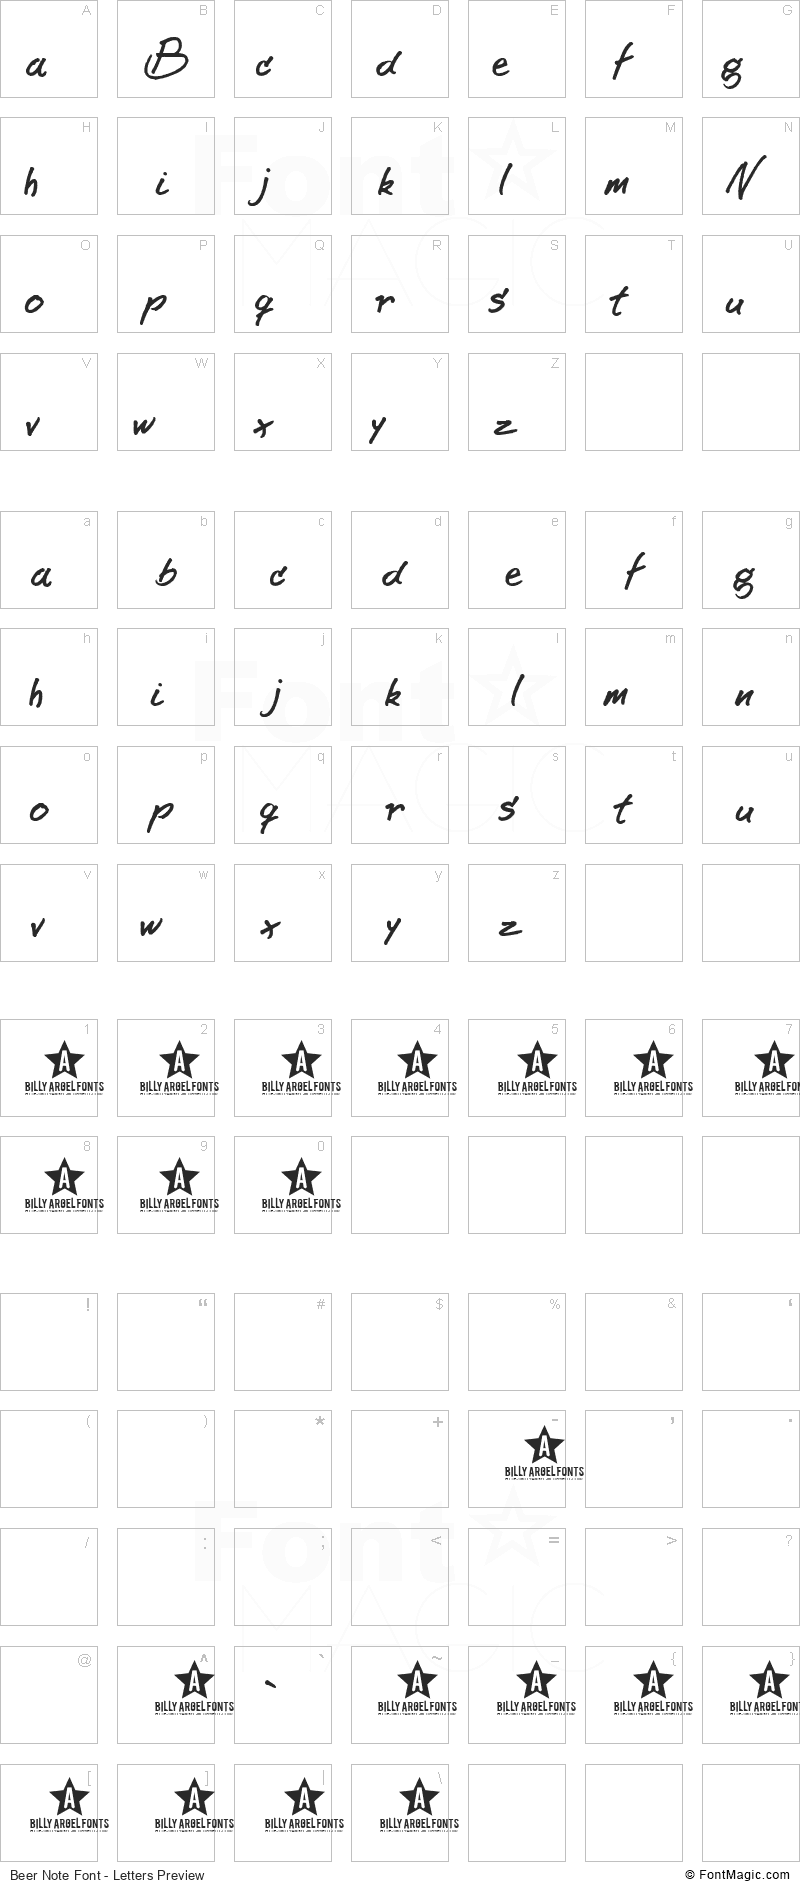 Beer Note Font - All Latters Preview Chart